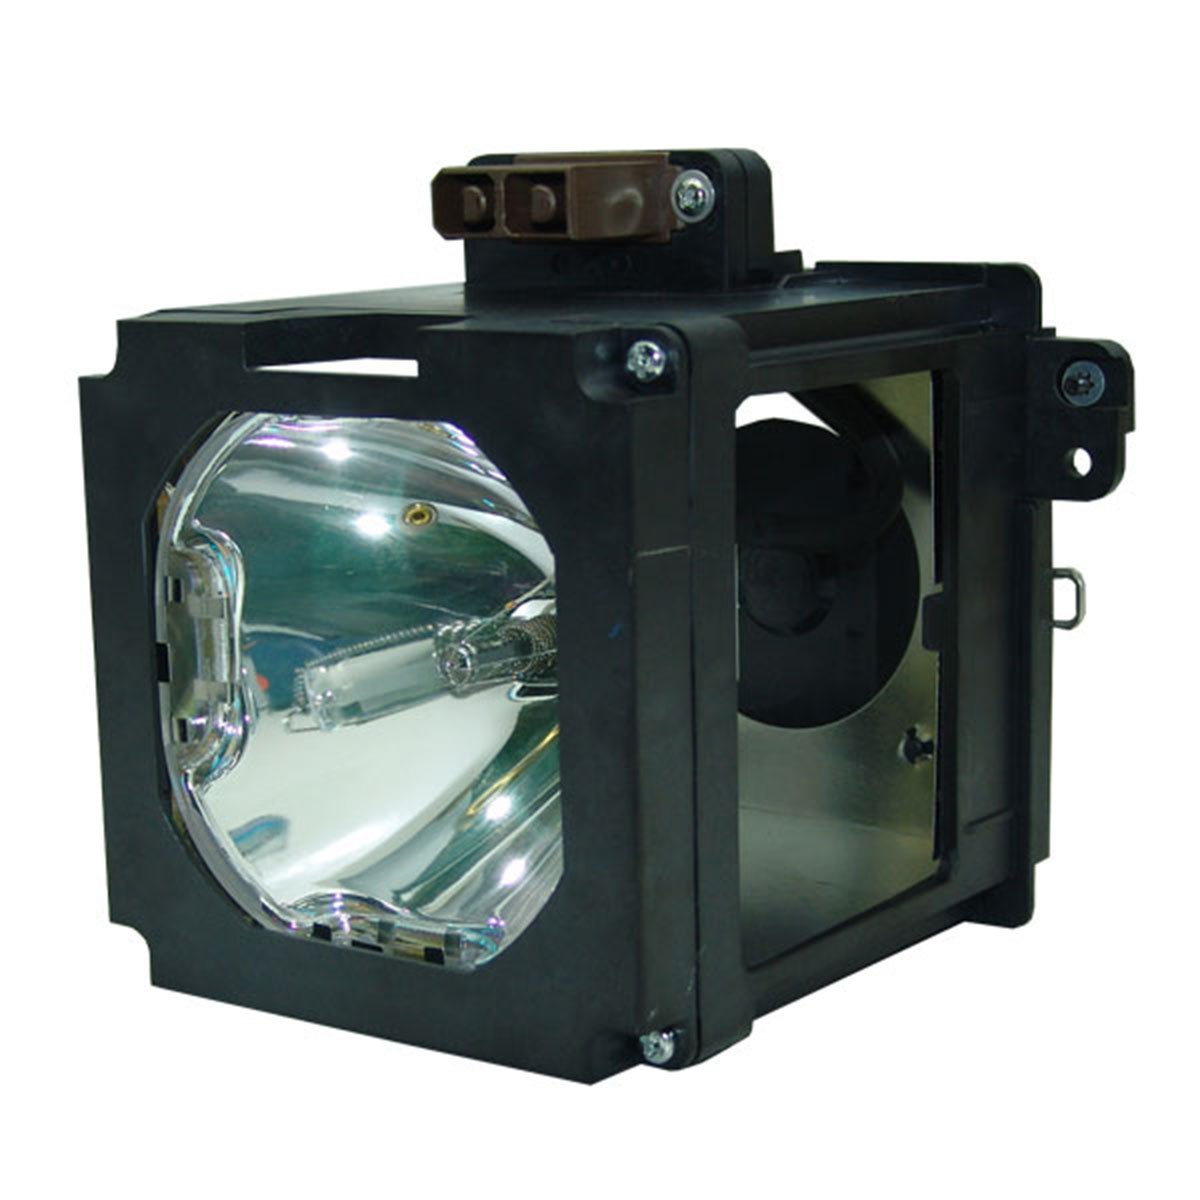 Lamp & Housing for the Yamaha DPX-1300 Projector - 90 Day Warranty - image 2 of 6